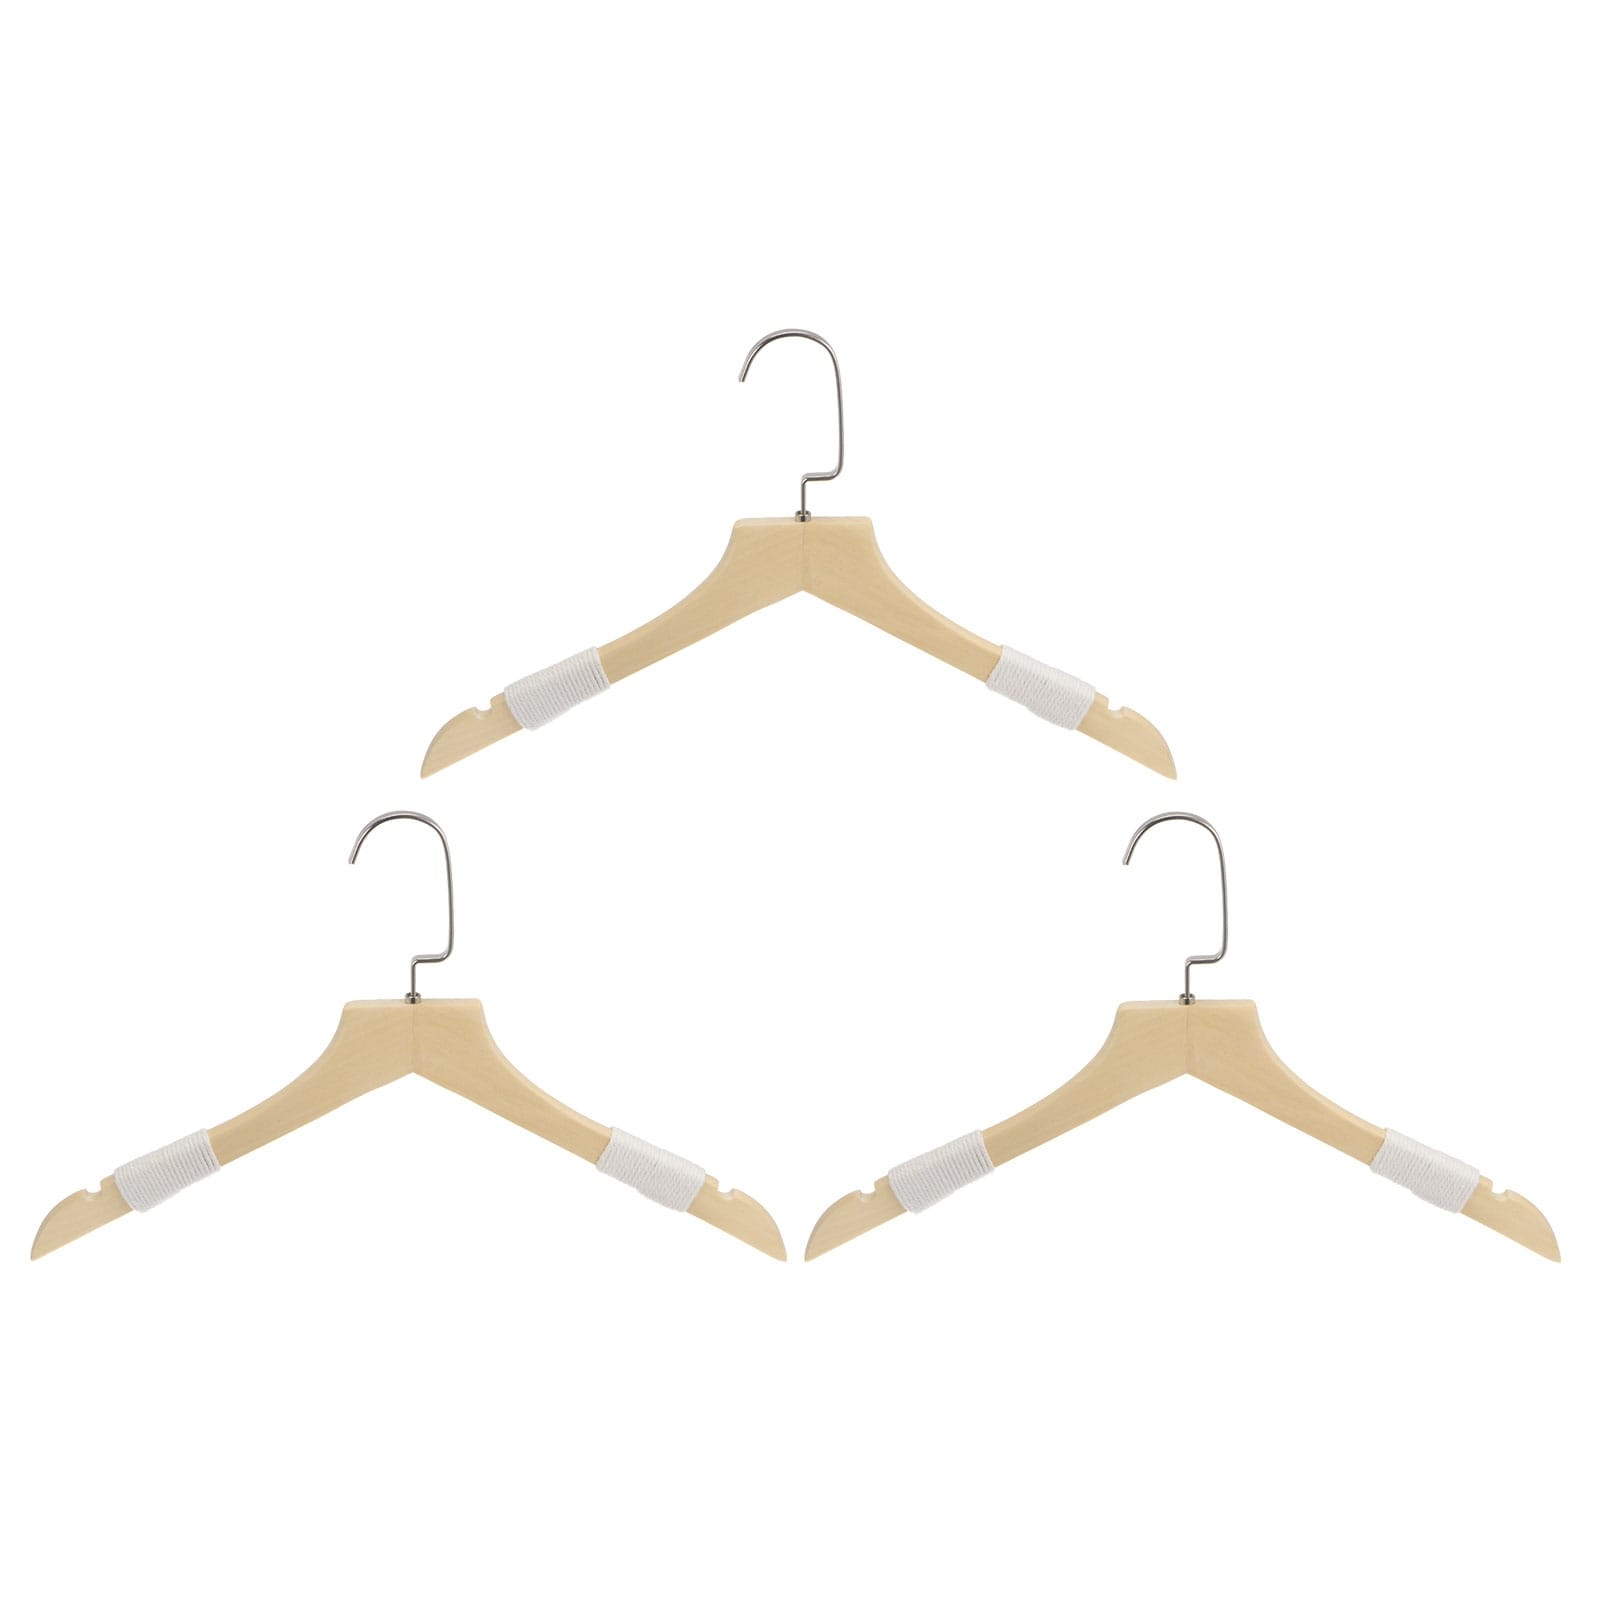 DesignStyles Clear Acrylic Clothes Hangers - 10 Pk - Bed Bath